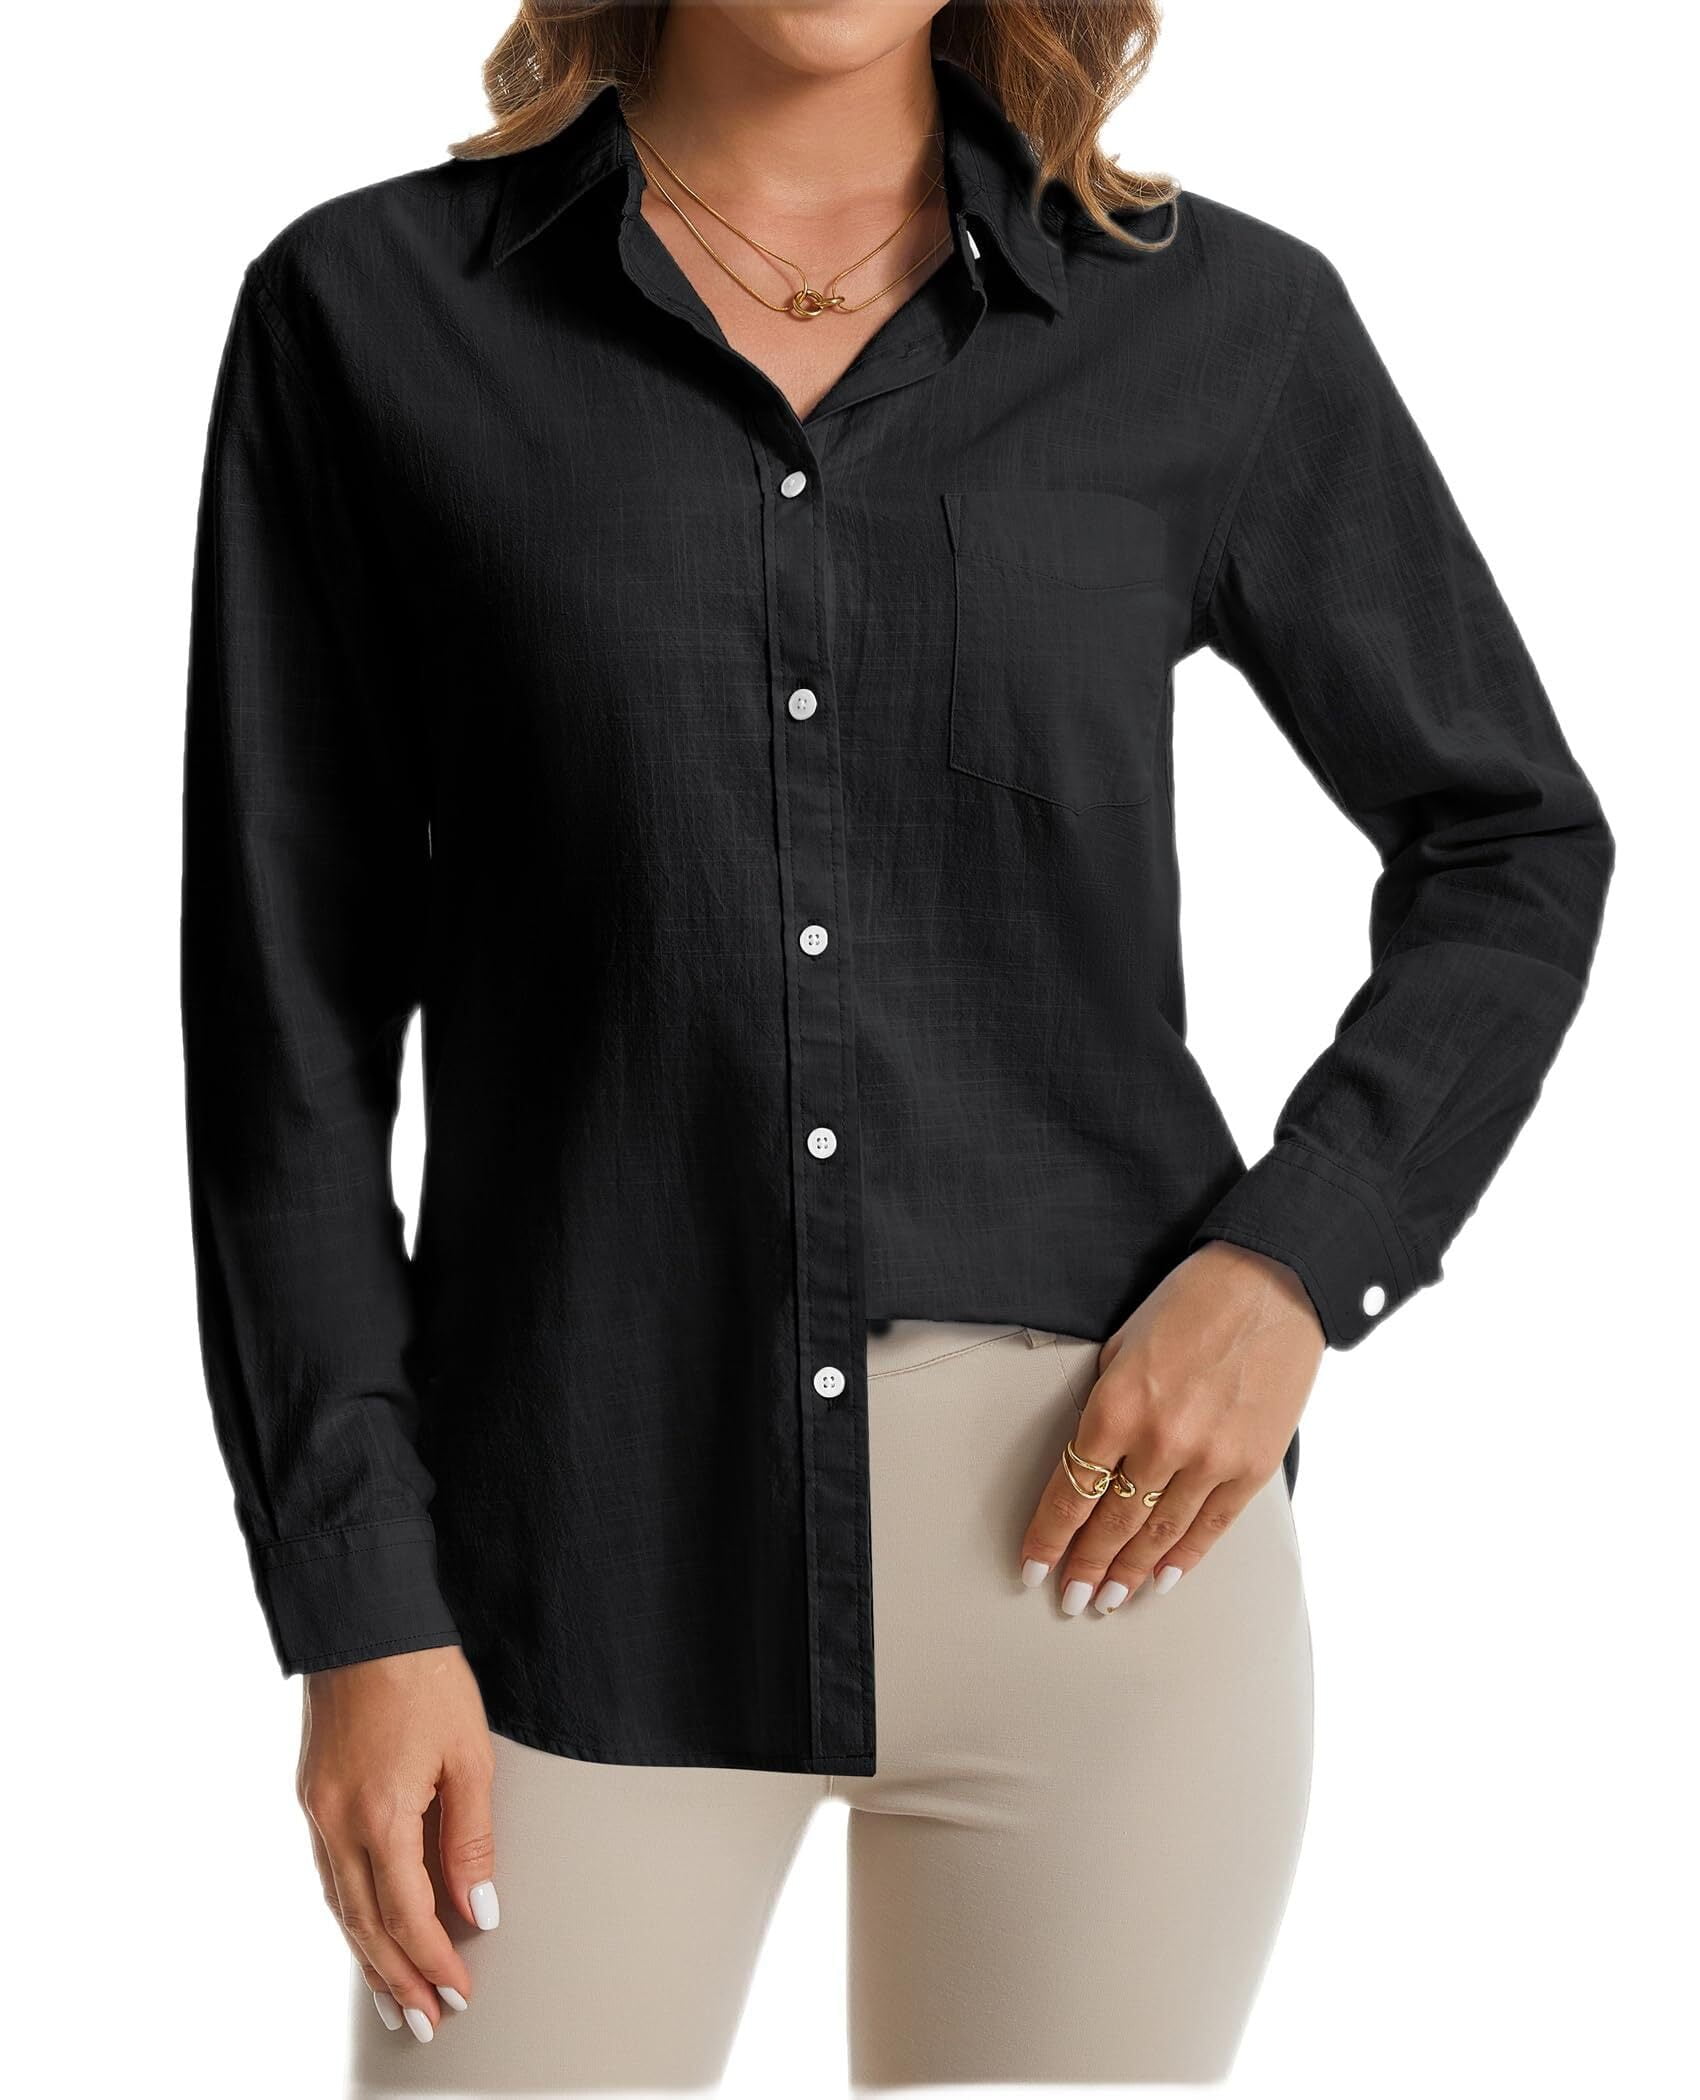 Women's Cotton and Linen Top with Loose Temperament and Large Size